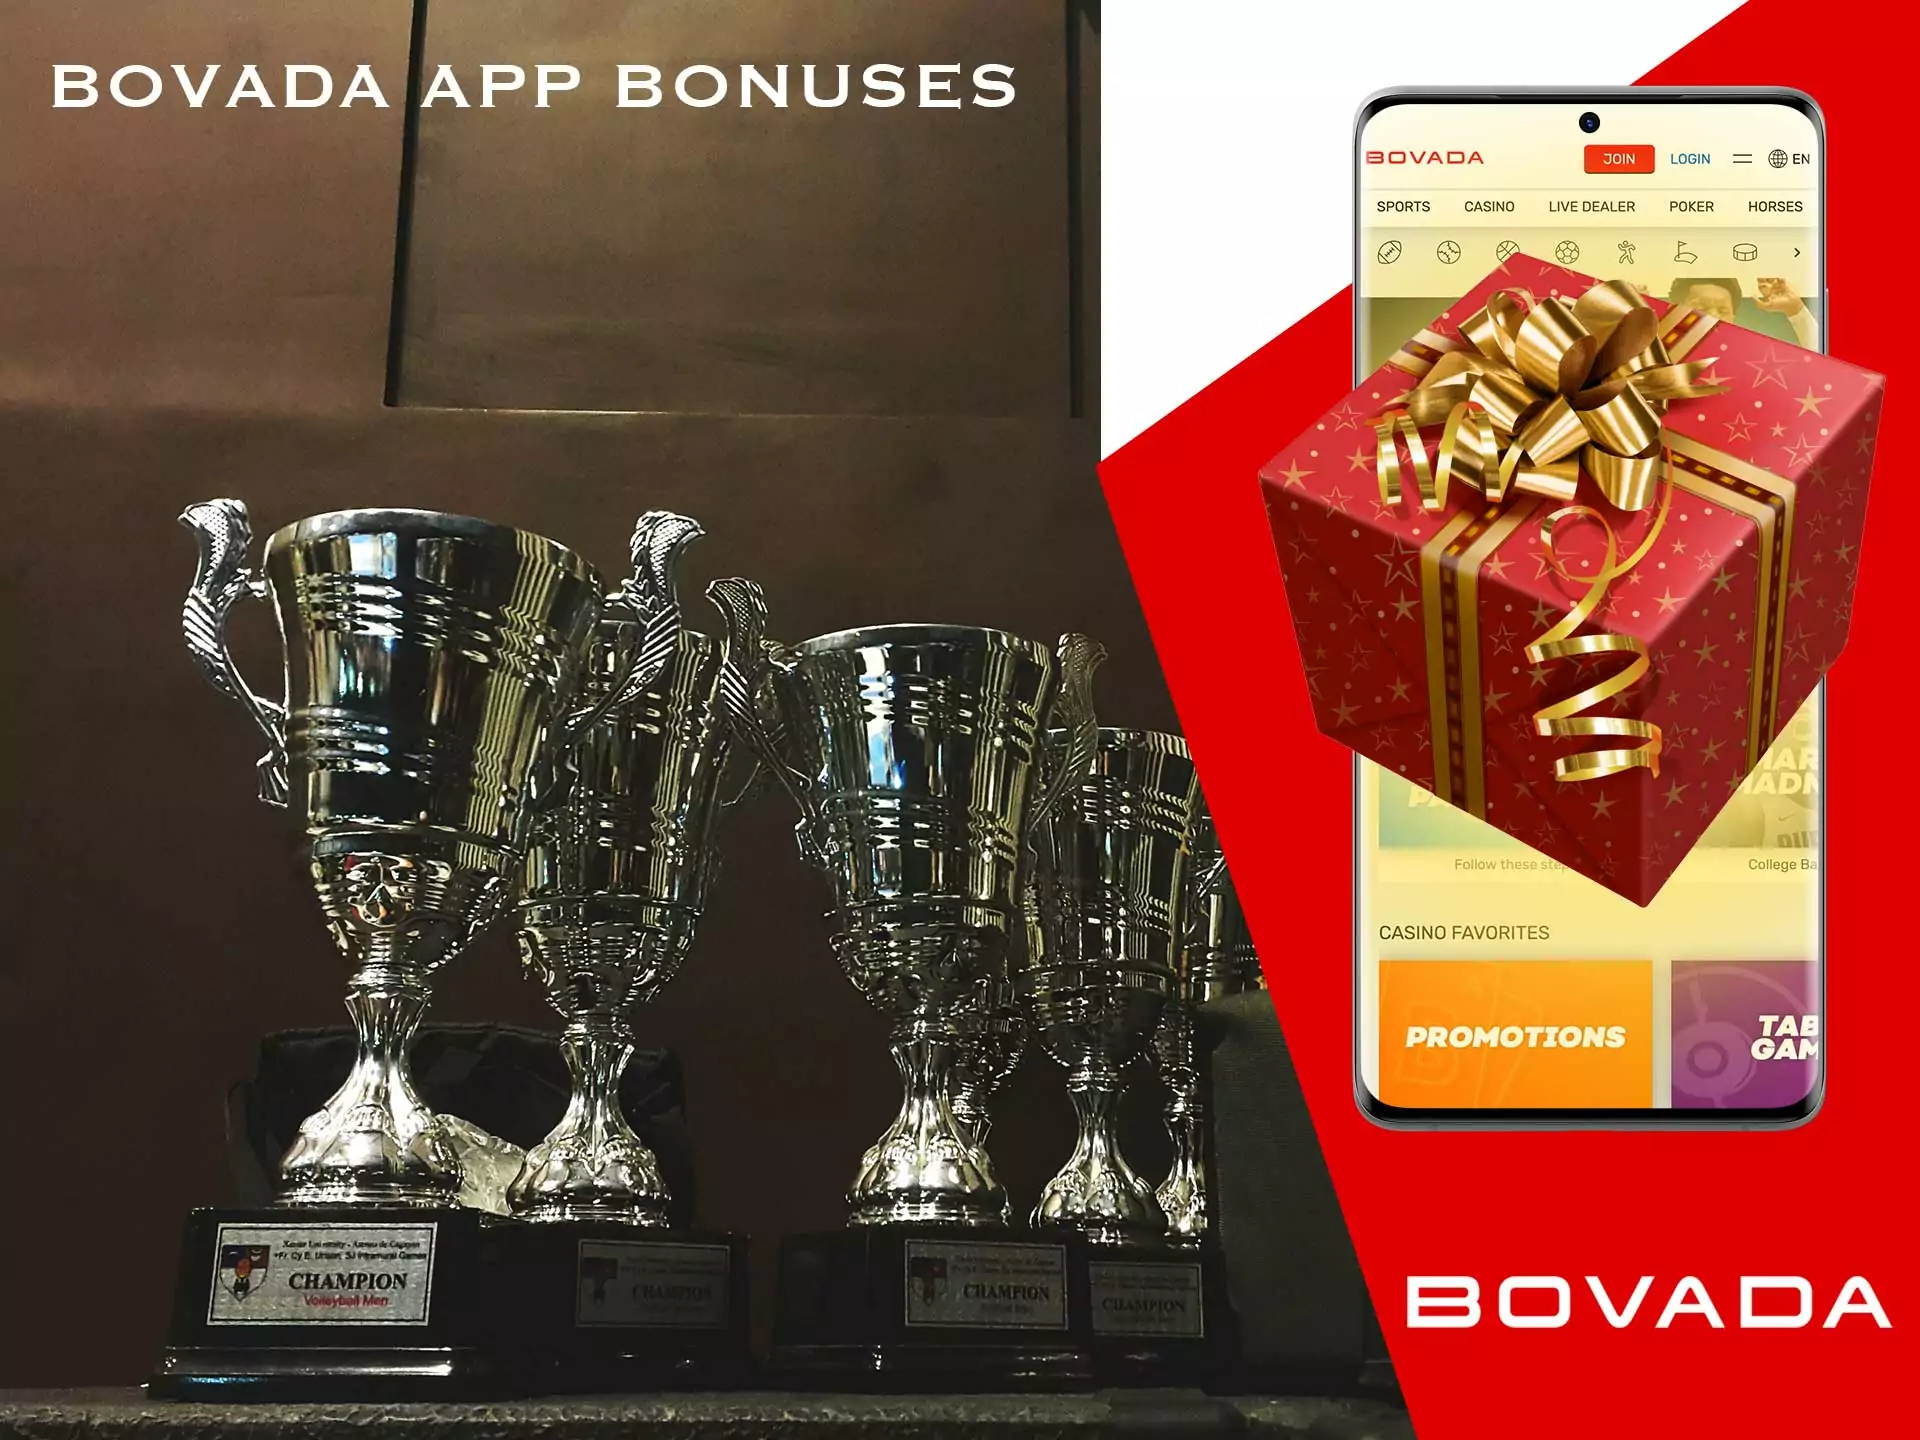 Promotions, bonuses, available in Bovada.